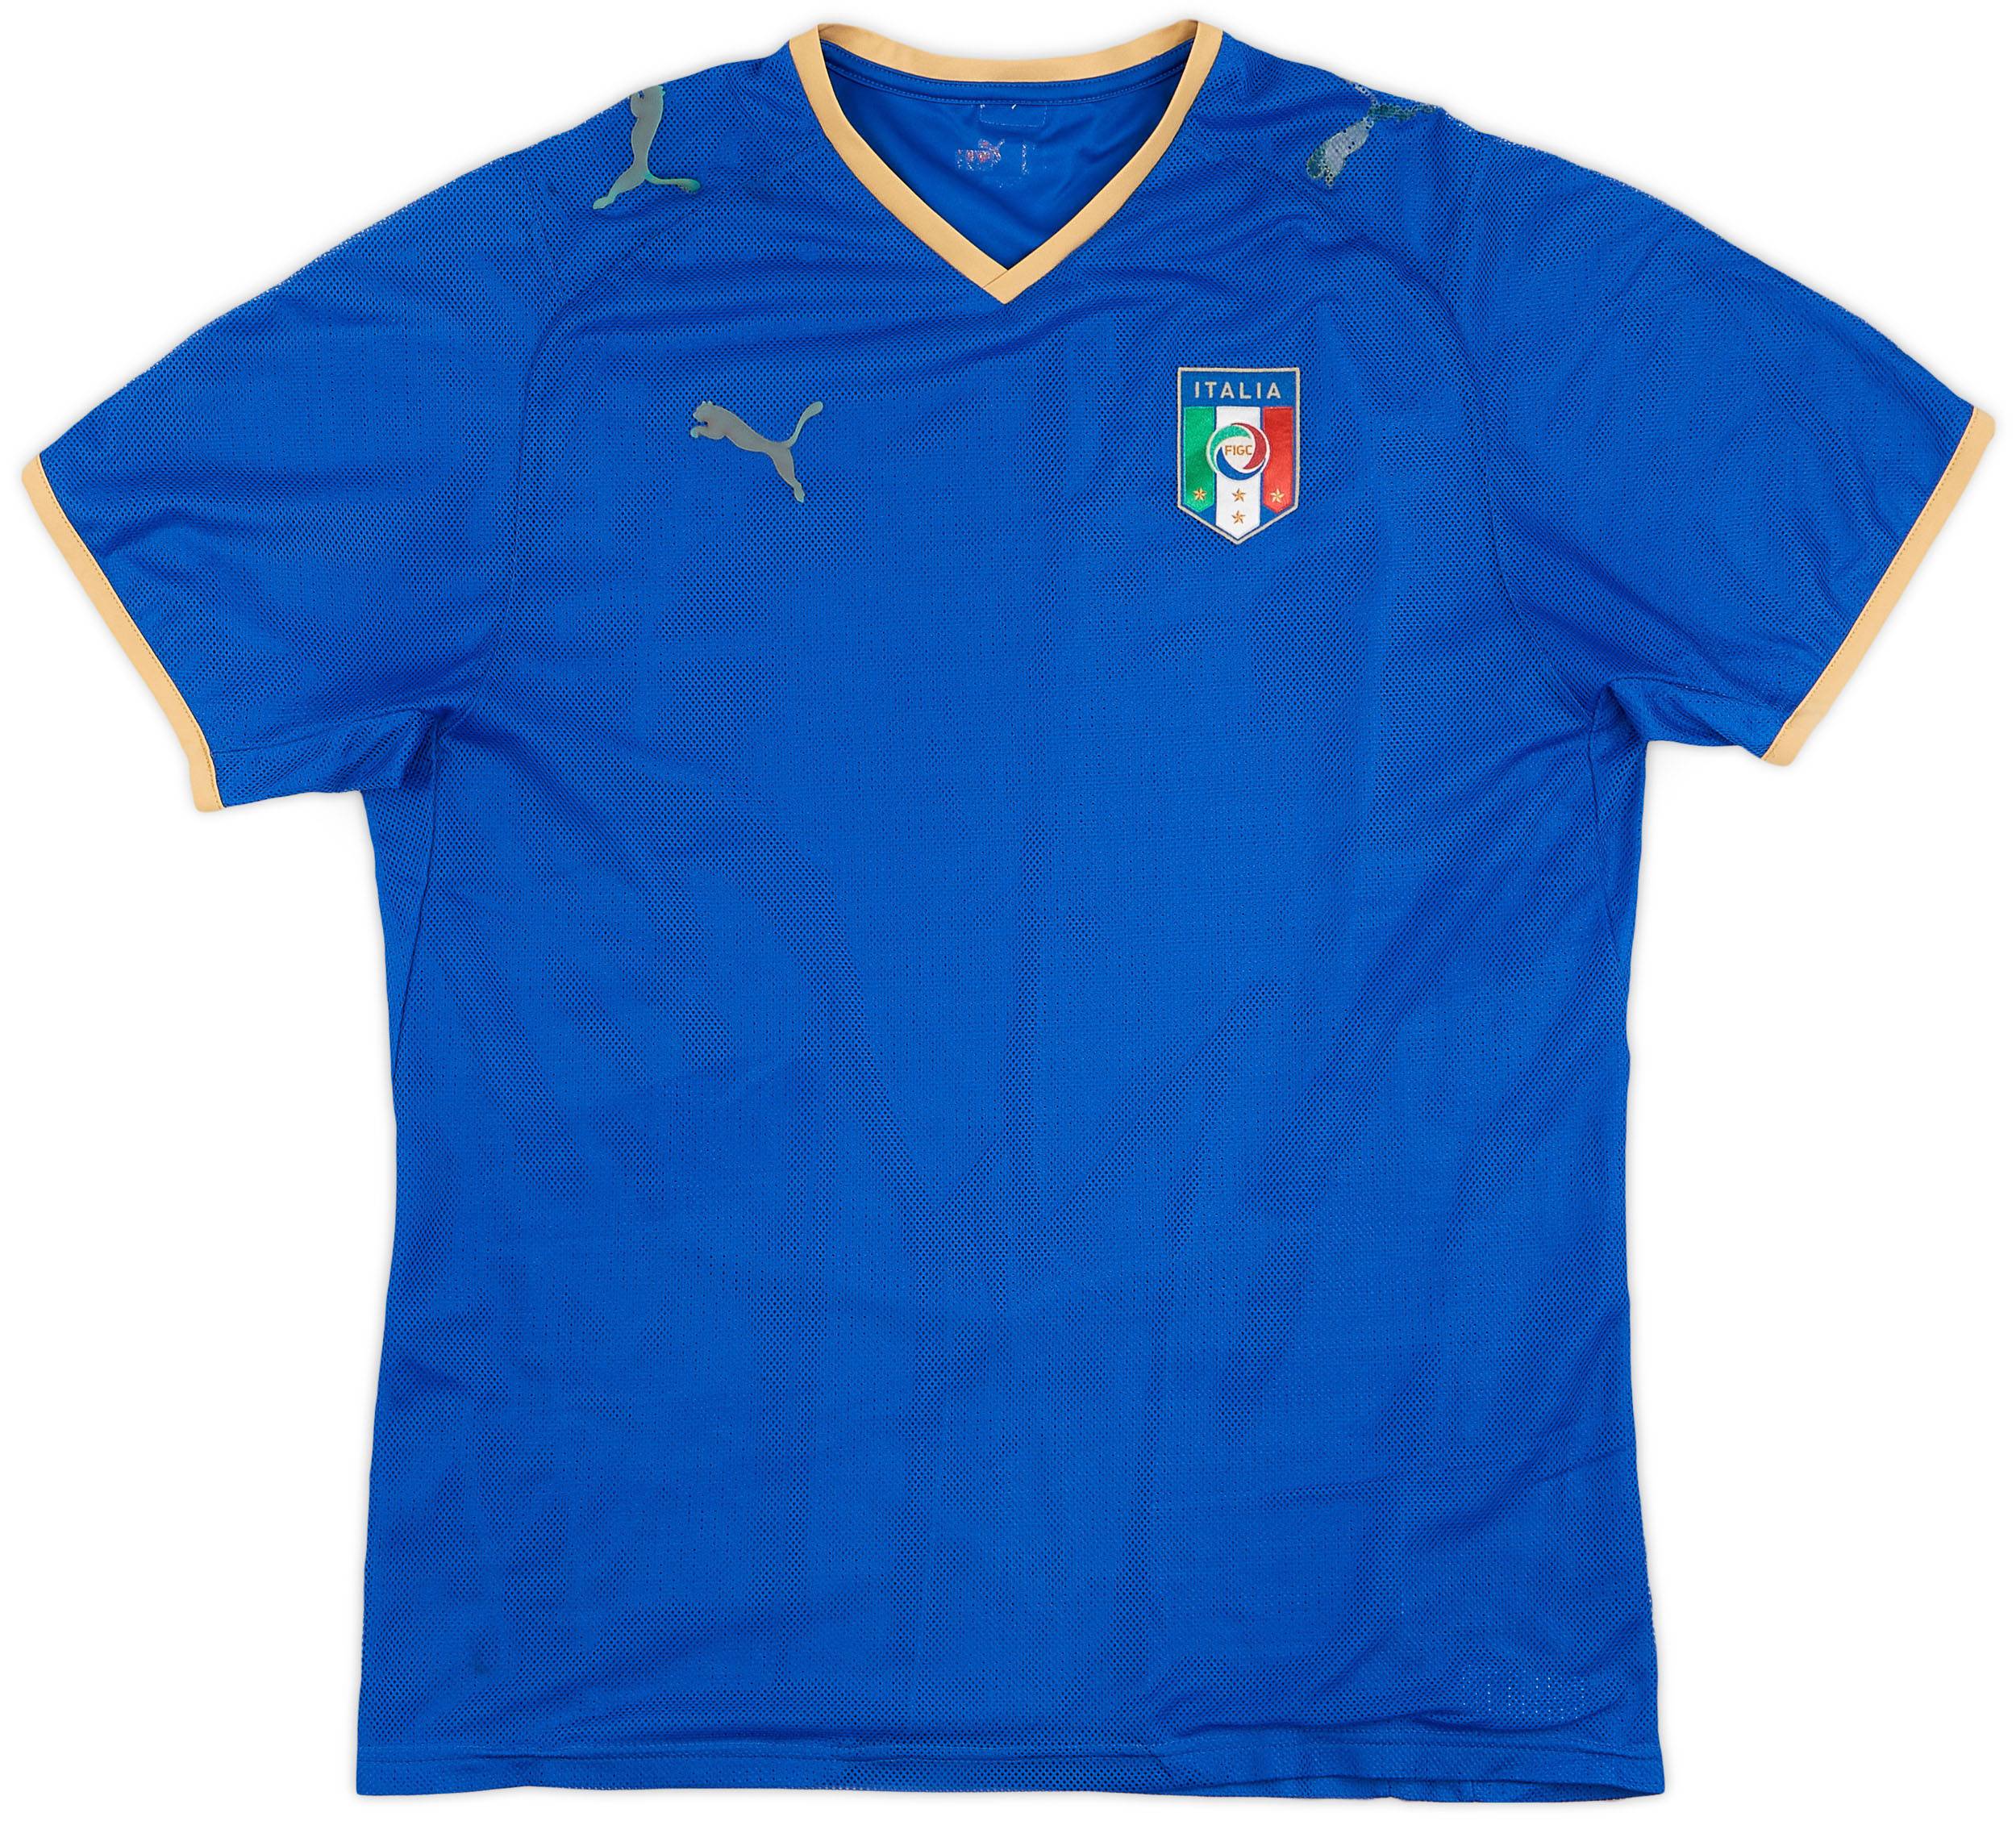 2007-08 Italy Home Shirt - 4/10 - (L)